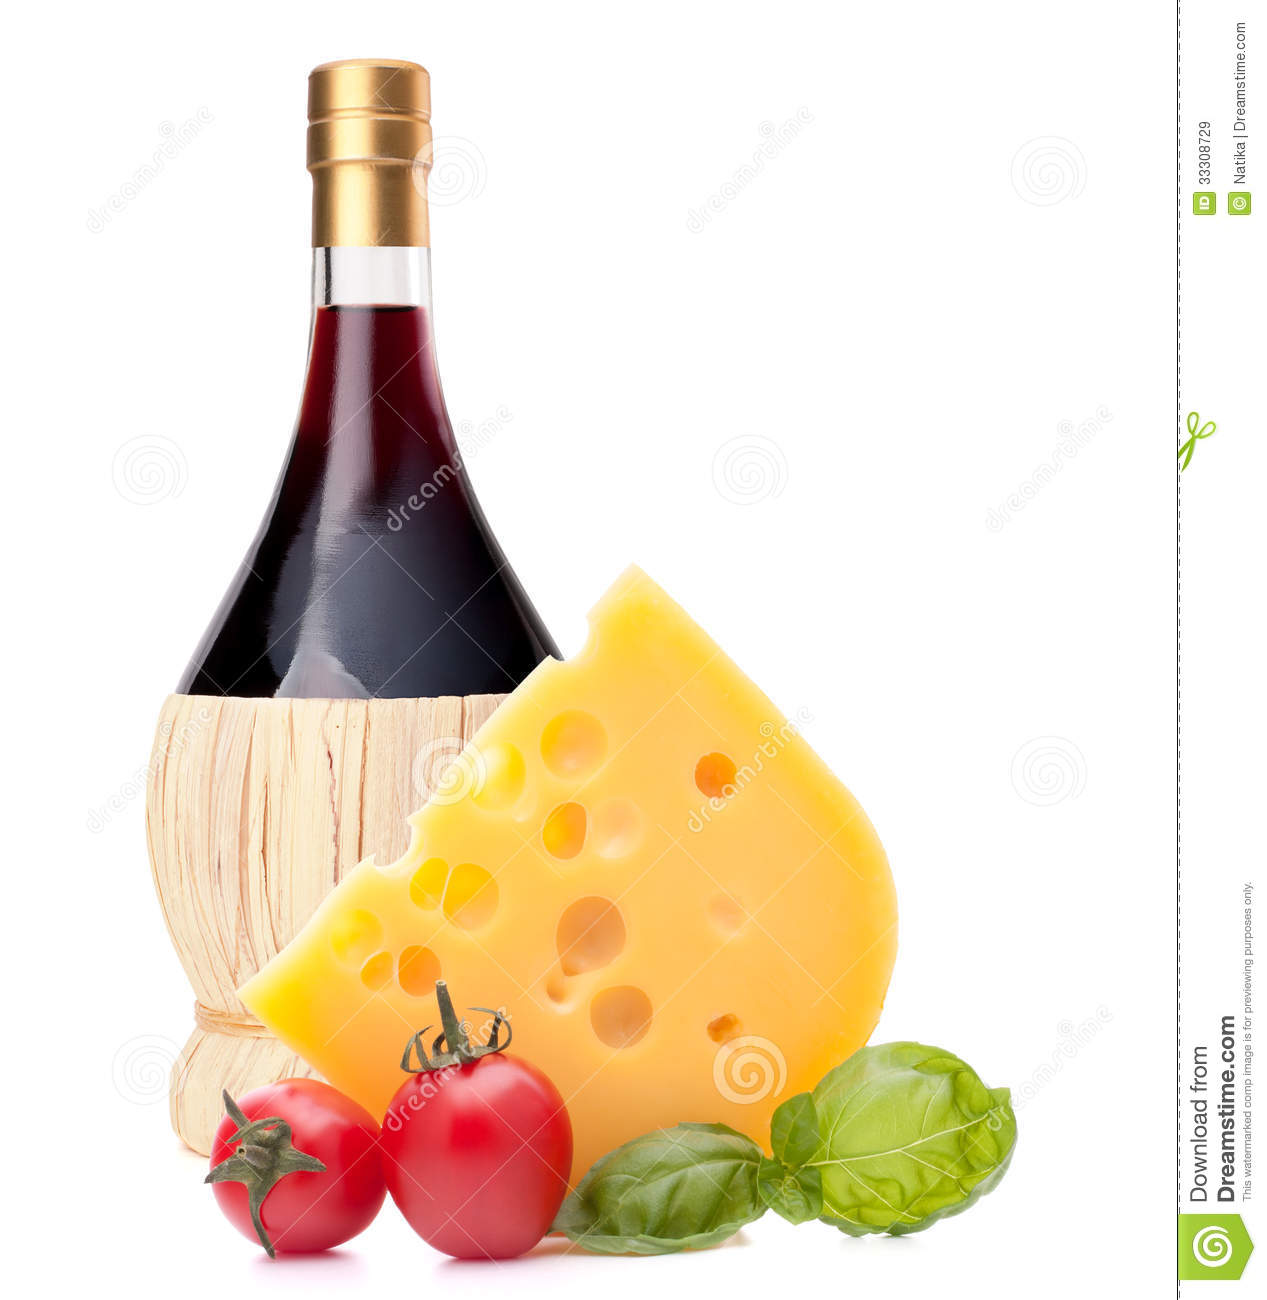 Red Wine Bottle Cheese And Tomato Still Life Royalty Free Stock